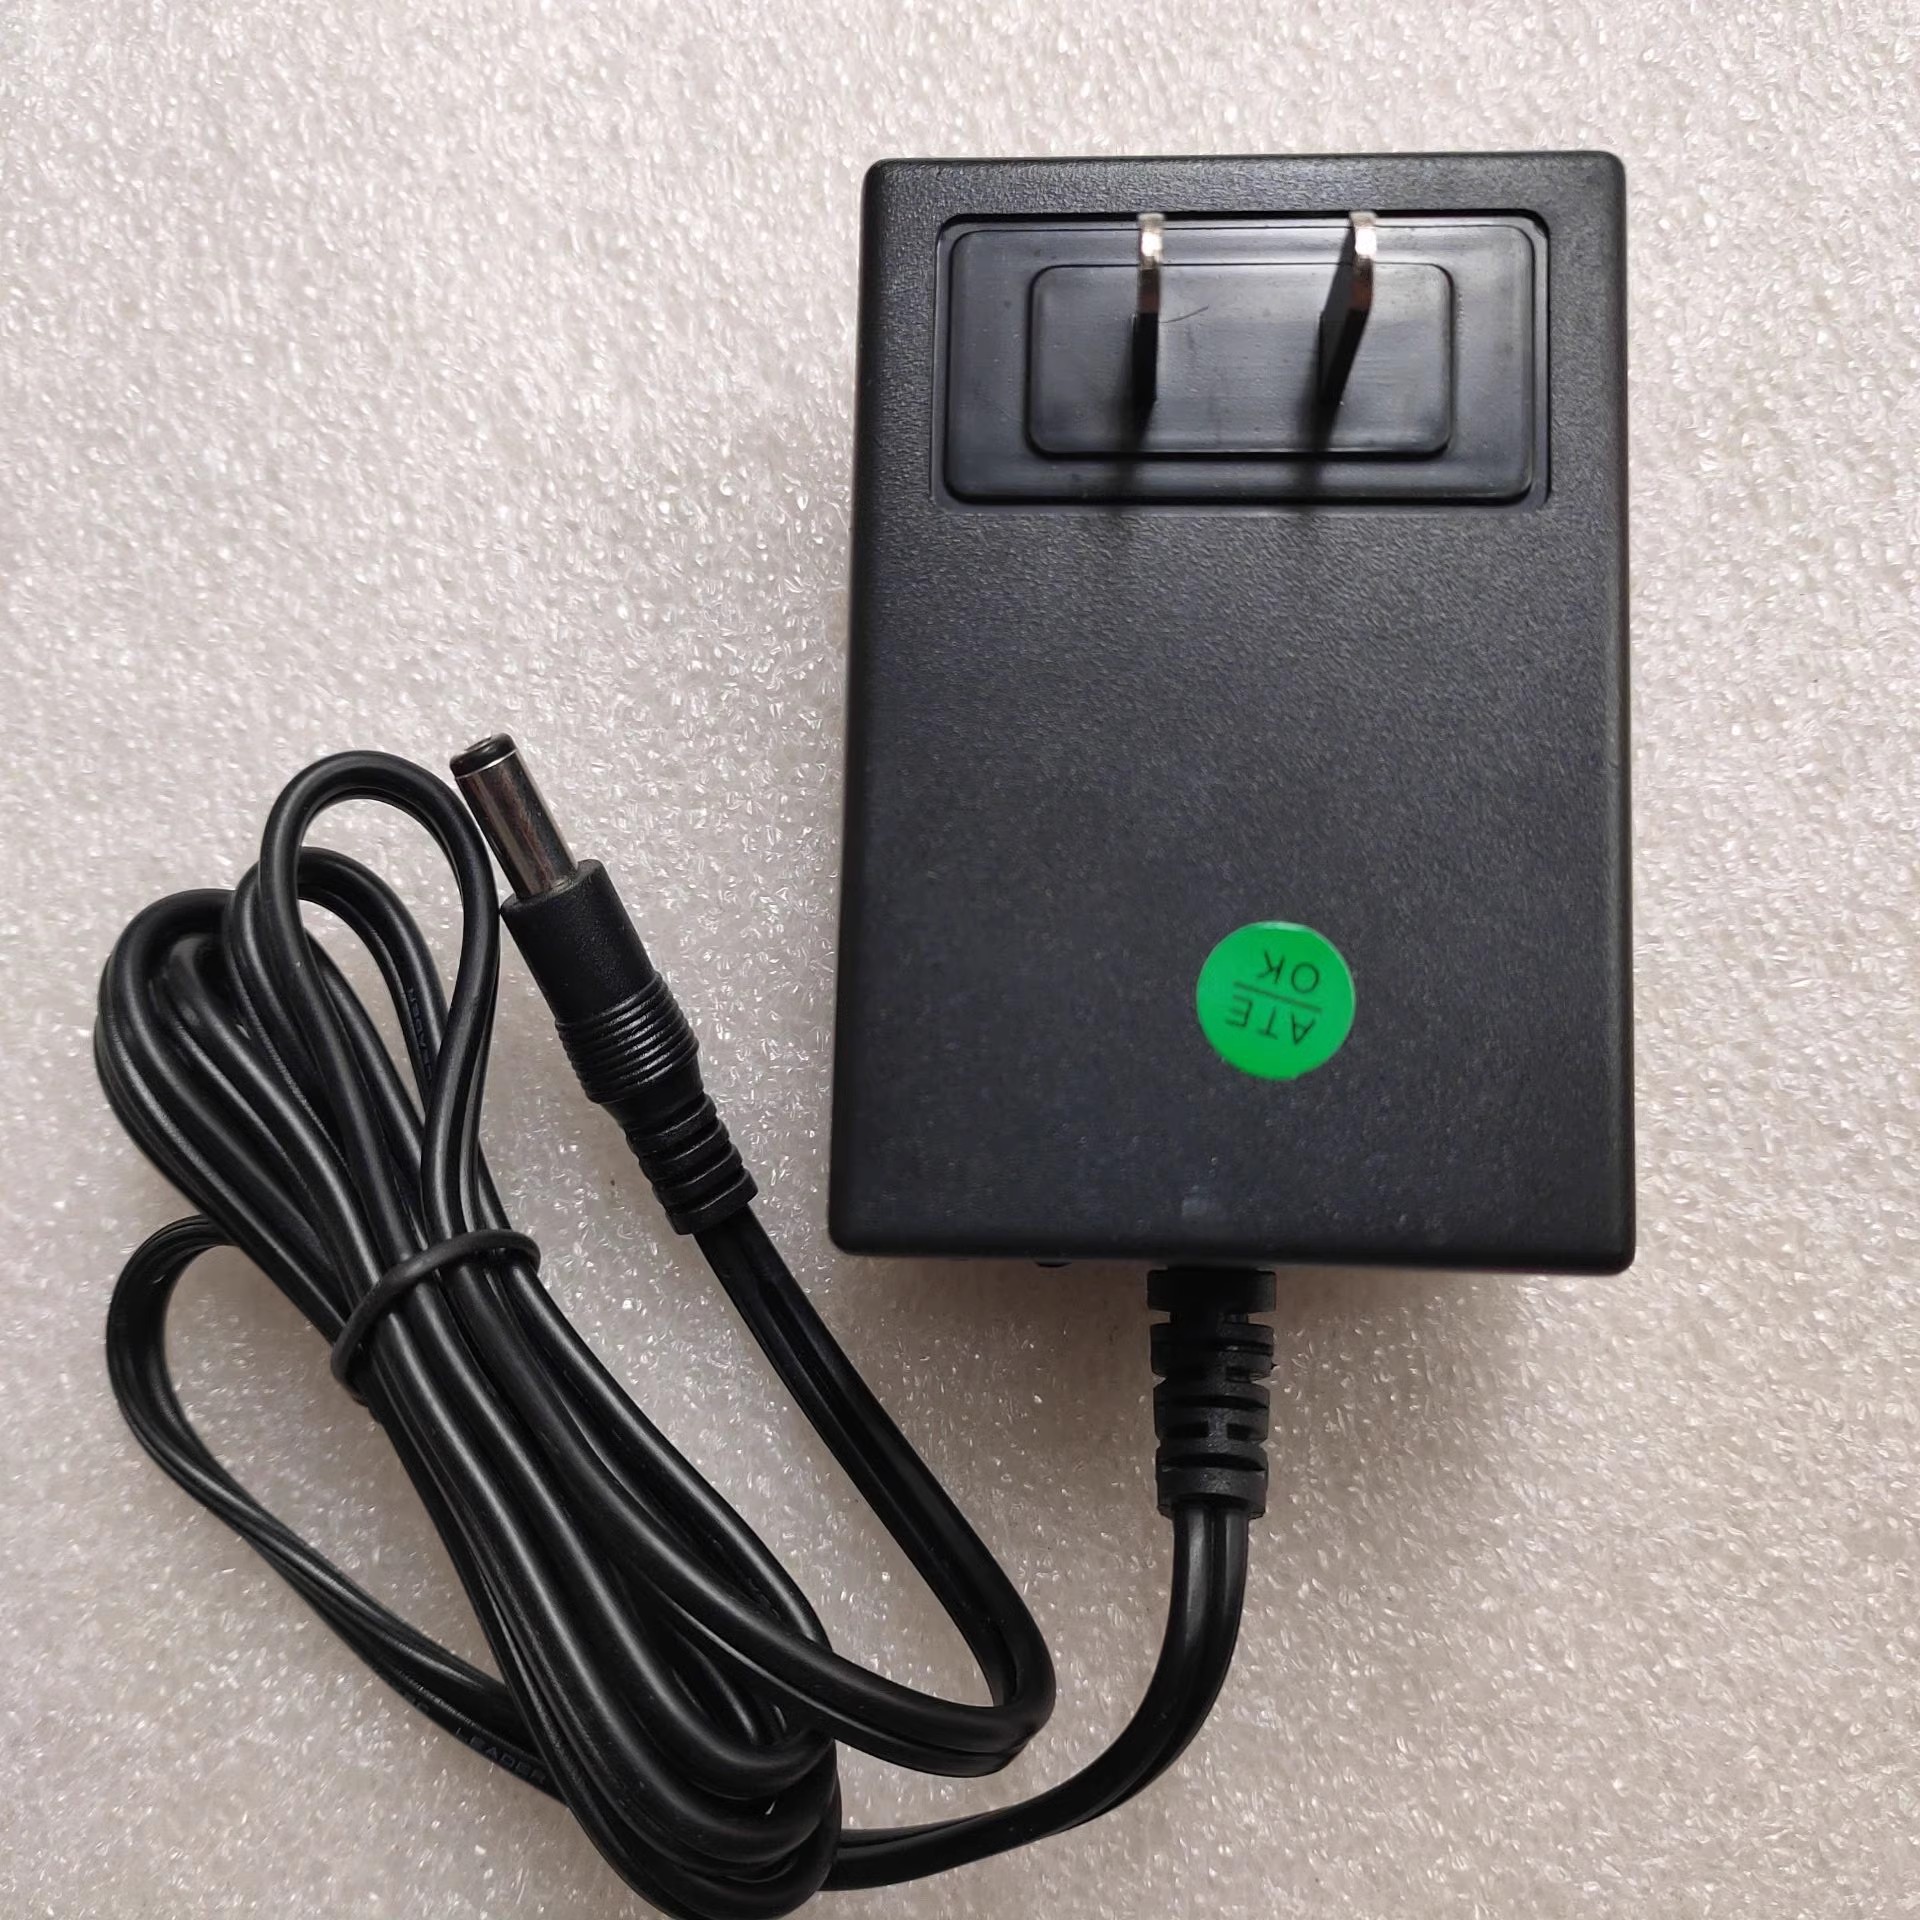 *Brand NEW* 5.5MM*2.1MM KW20-13 8.4V 1.5A AC DC ADAPTHE POWER Supply